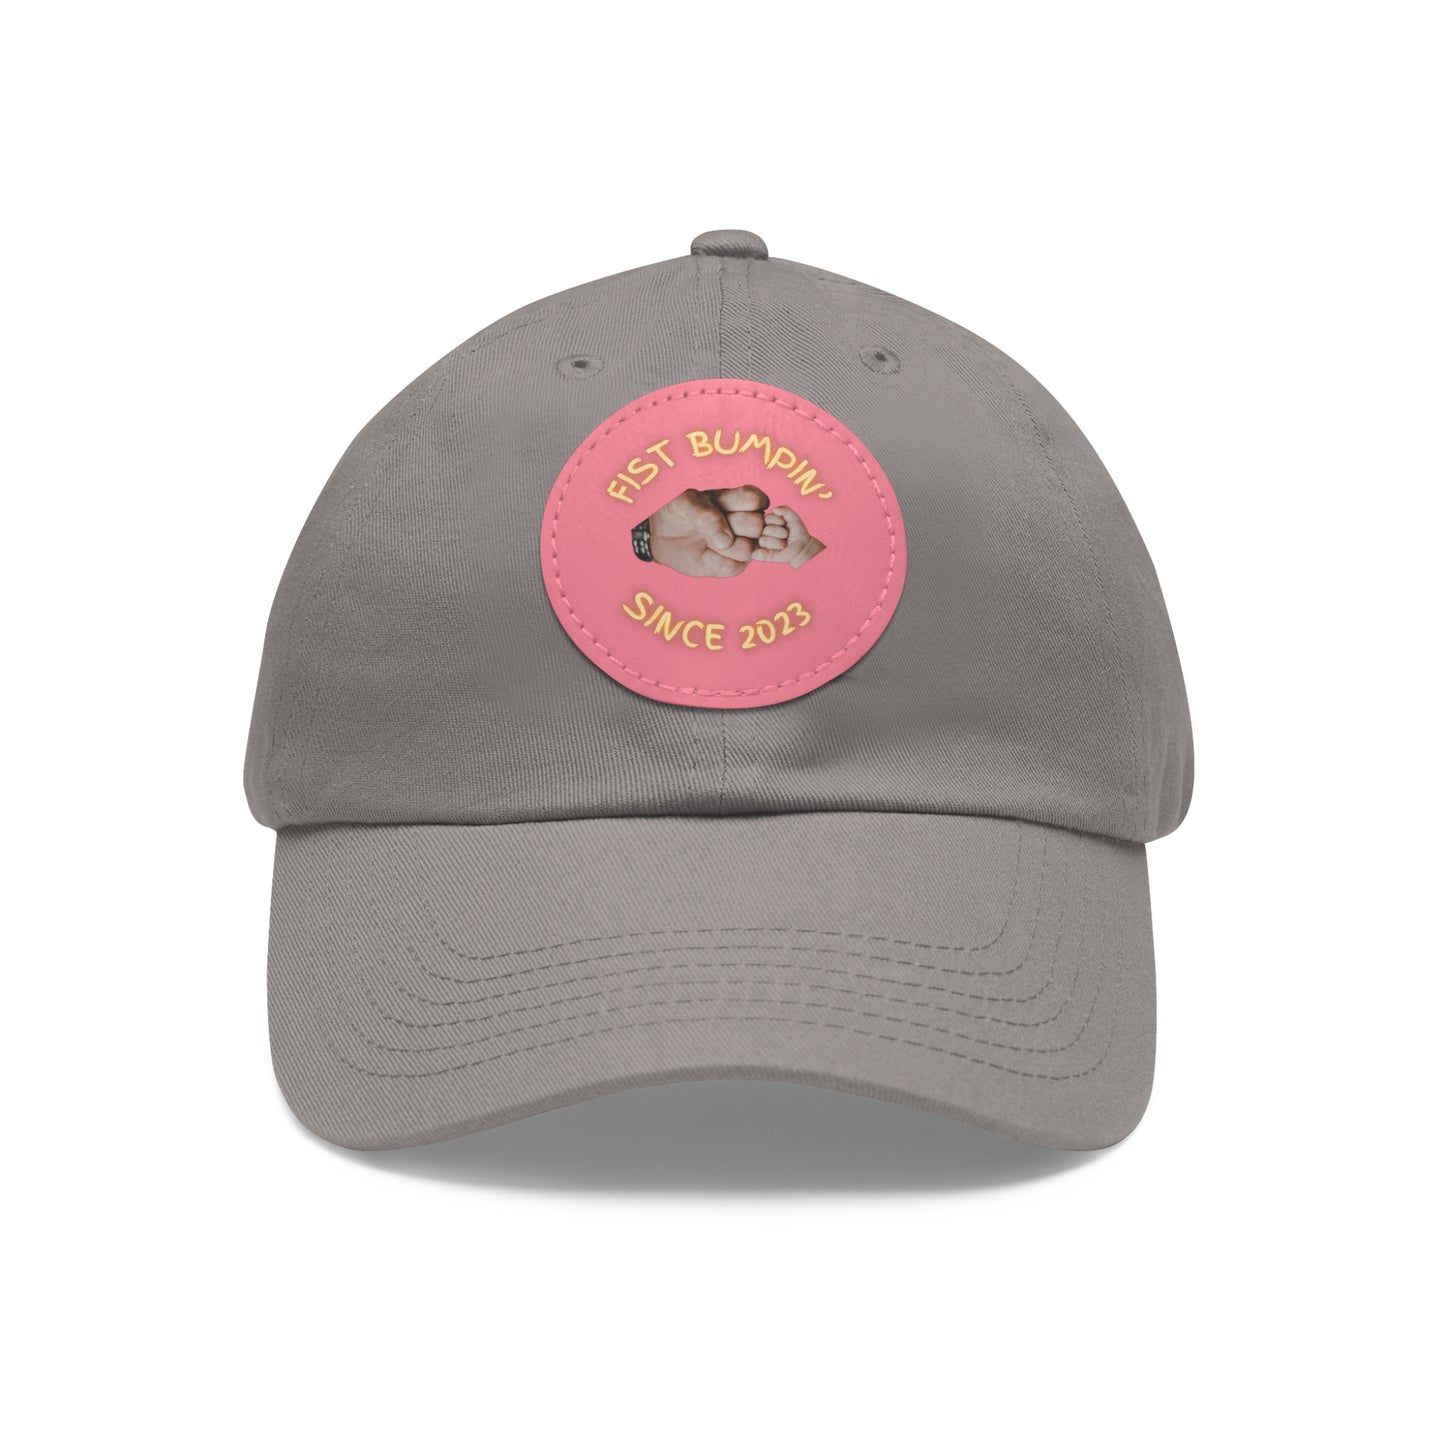 Fist Bumpin’ Since 2023 KC Gold Lettering Dad Hat with Leather Patch (Round)